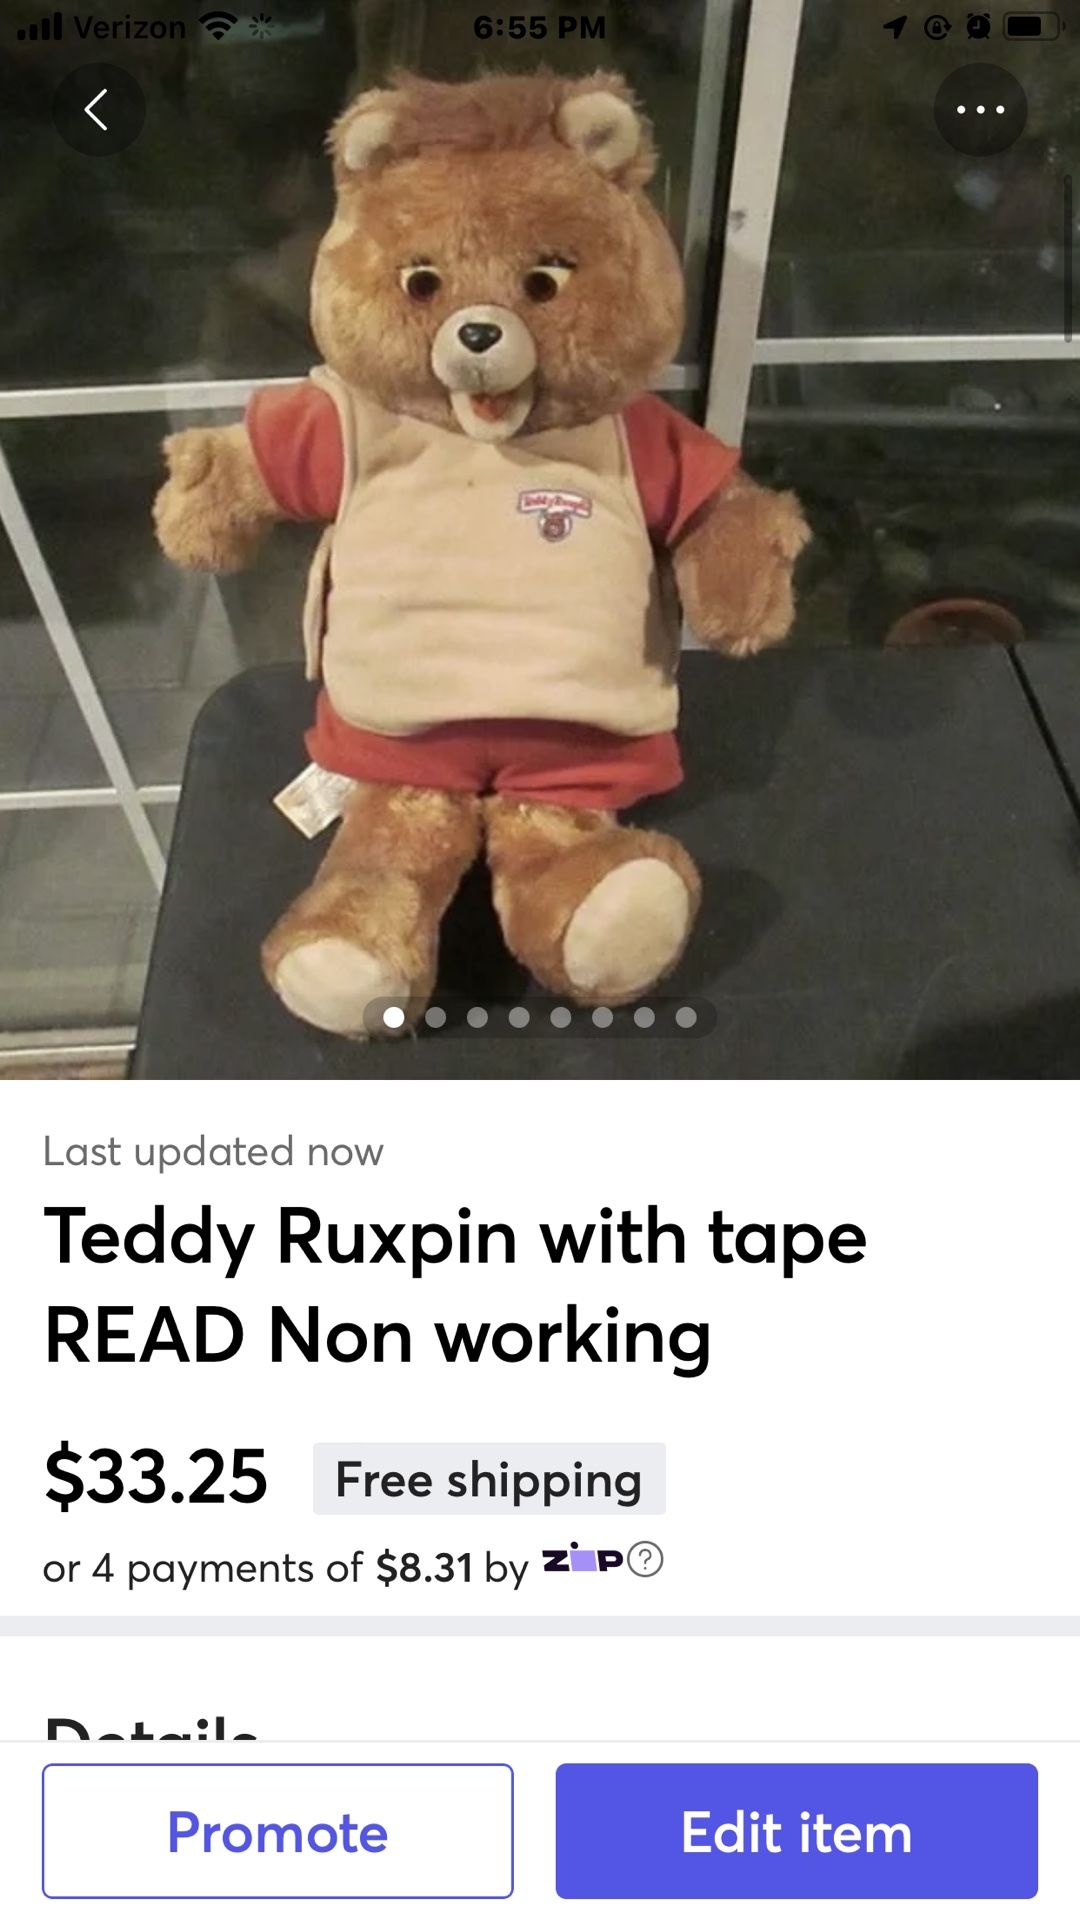 Teddy Ruxpin with tape READ Non working